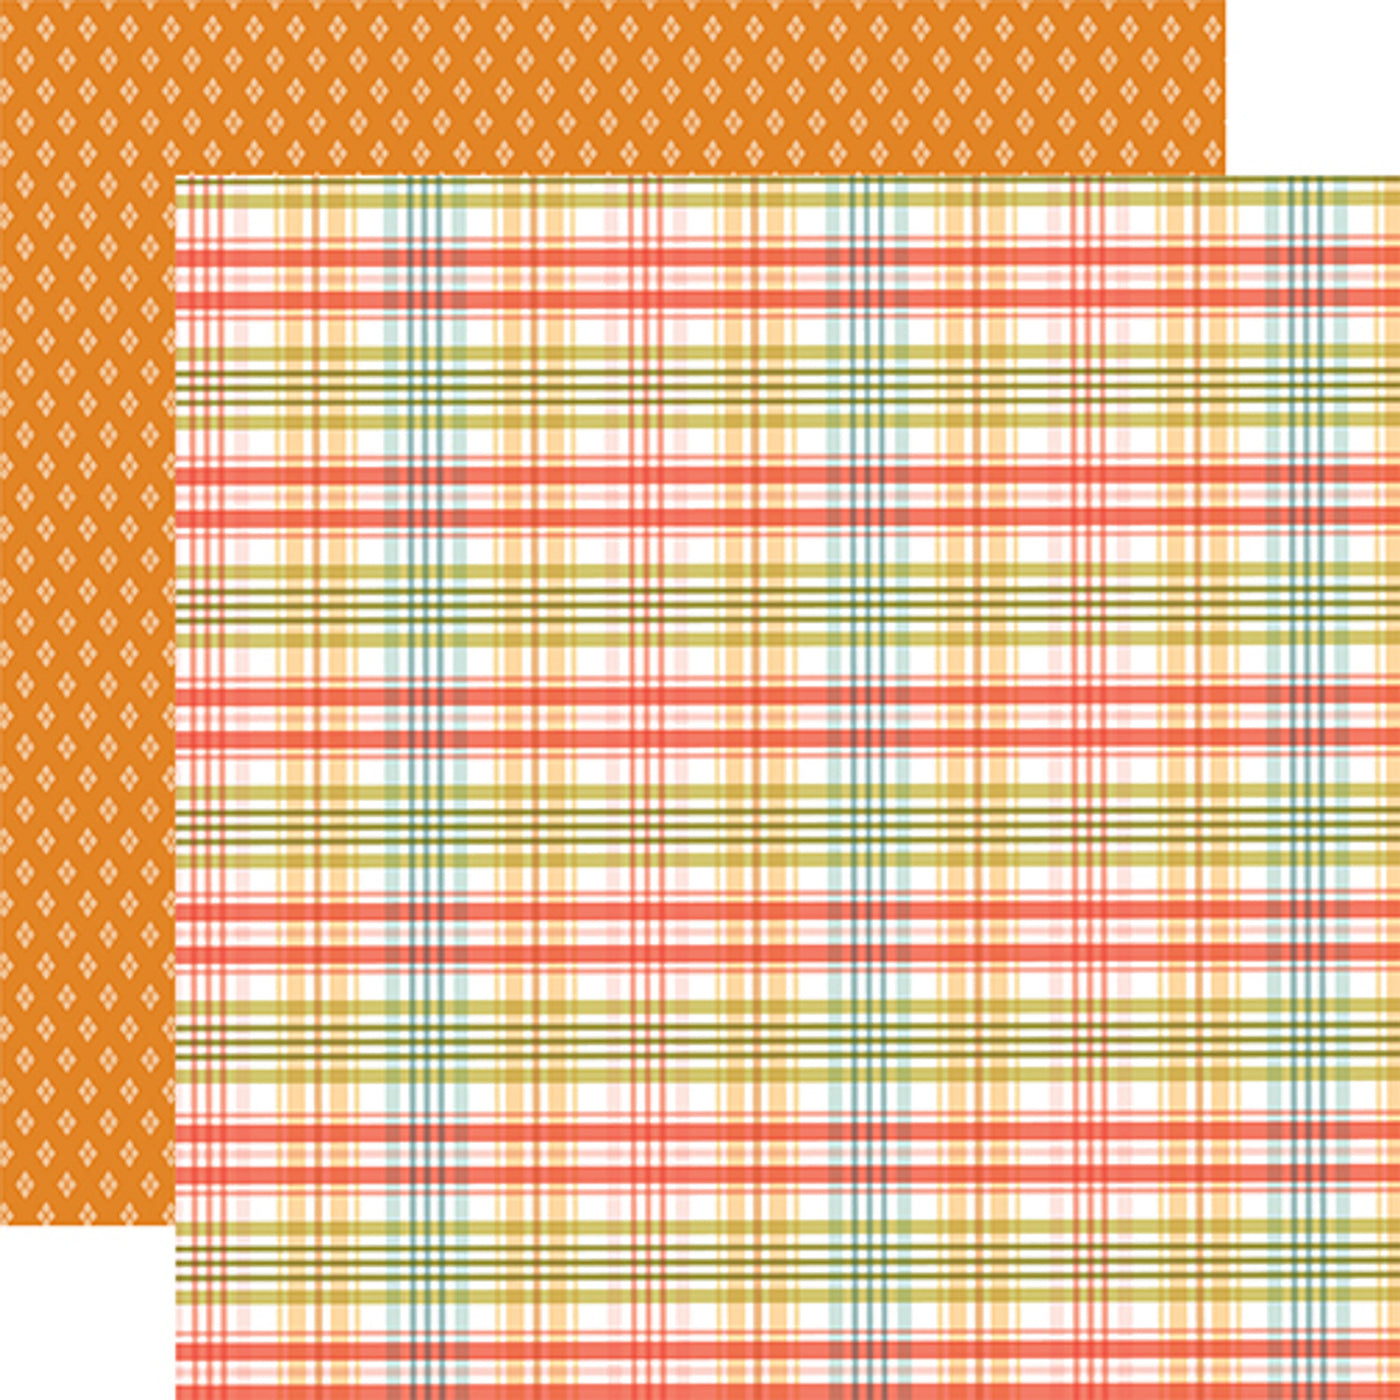 This archival-quality 12x12 double-sided paper is full of possibilities. (Side A—orange, yellow, green, and blue plaid; Side B—yellow diamond pattern on an orange background). Made from acid-free materials, this paper is perfect for preserving your creations for years to come.